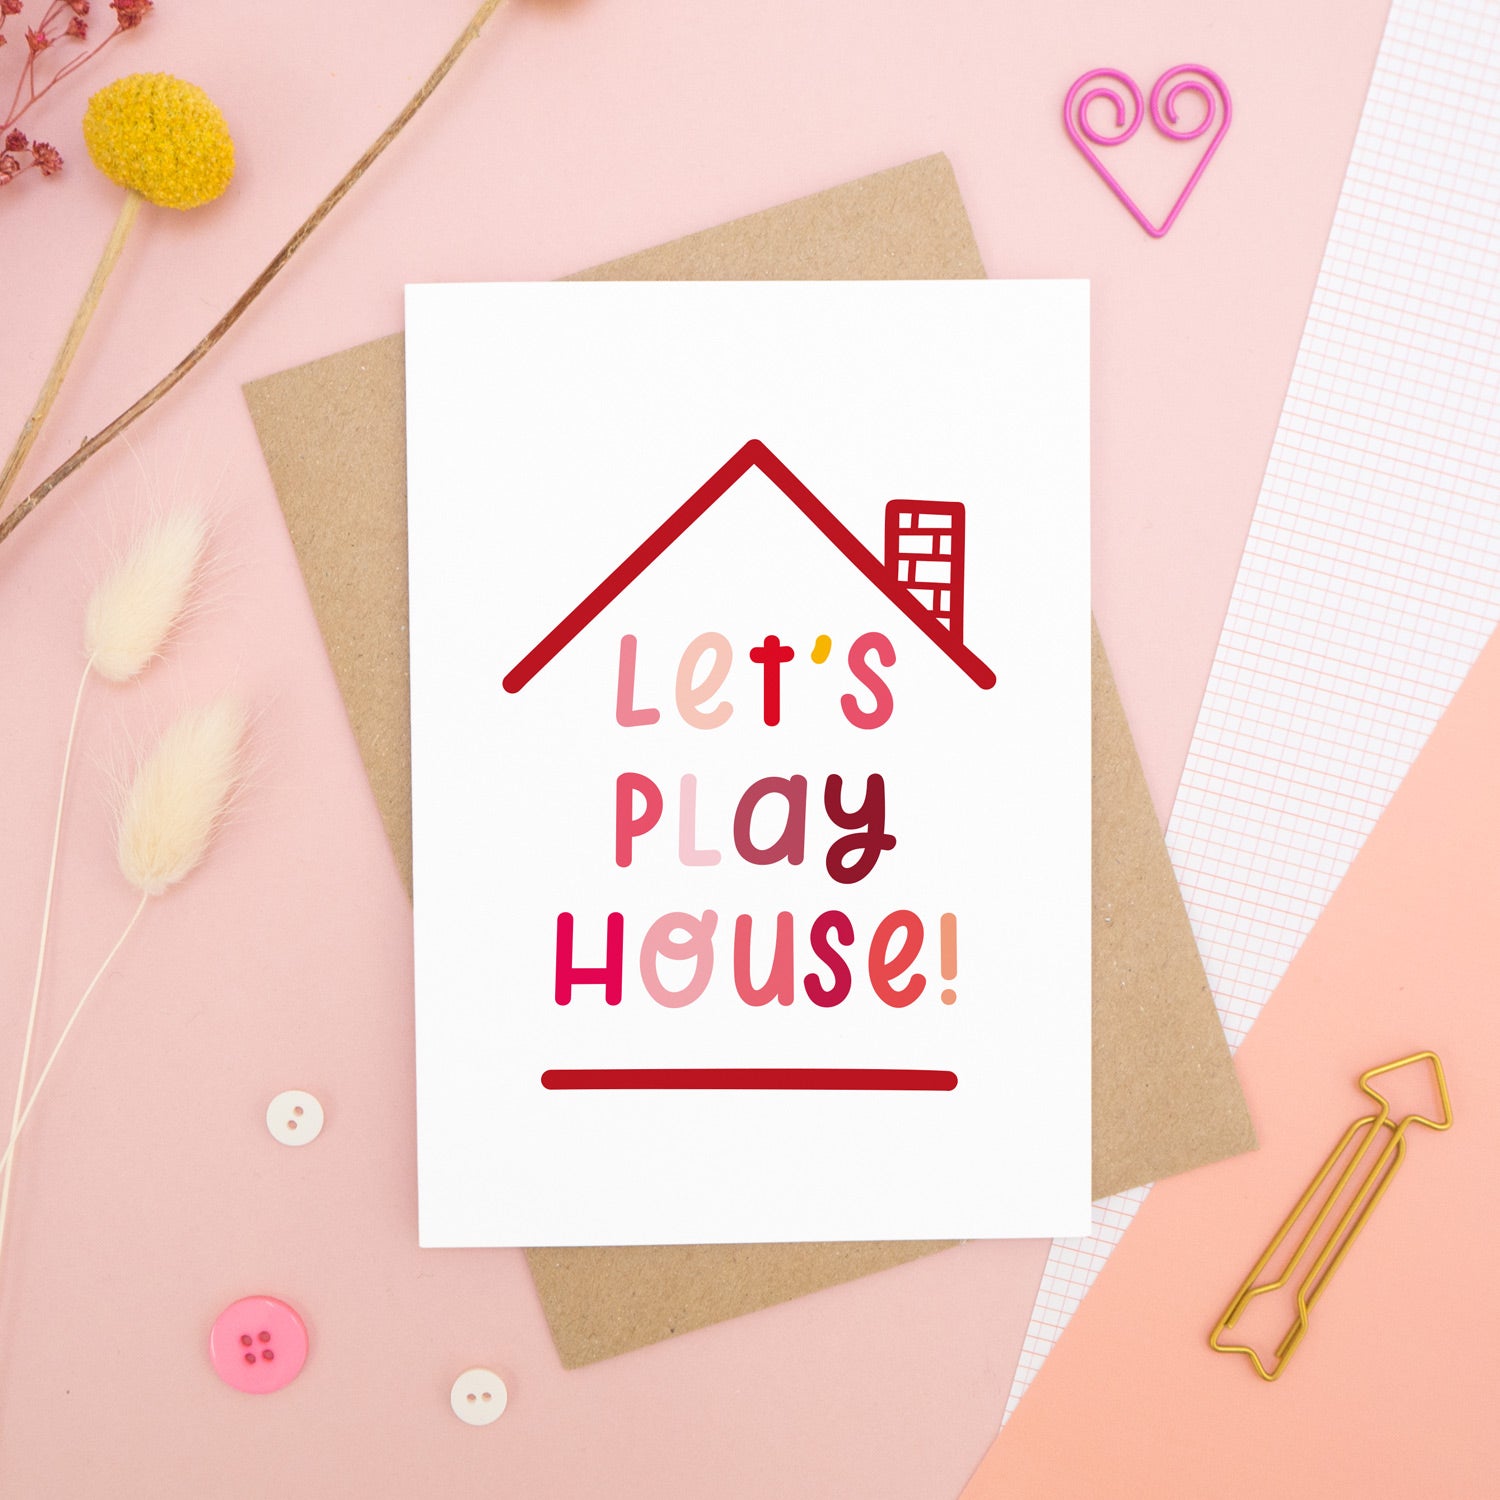 The 'let's play house' card photographed on a pink background with dried flowers, buttons and paper clips as props. 